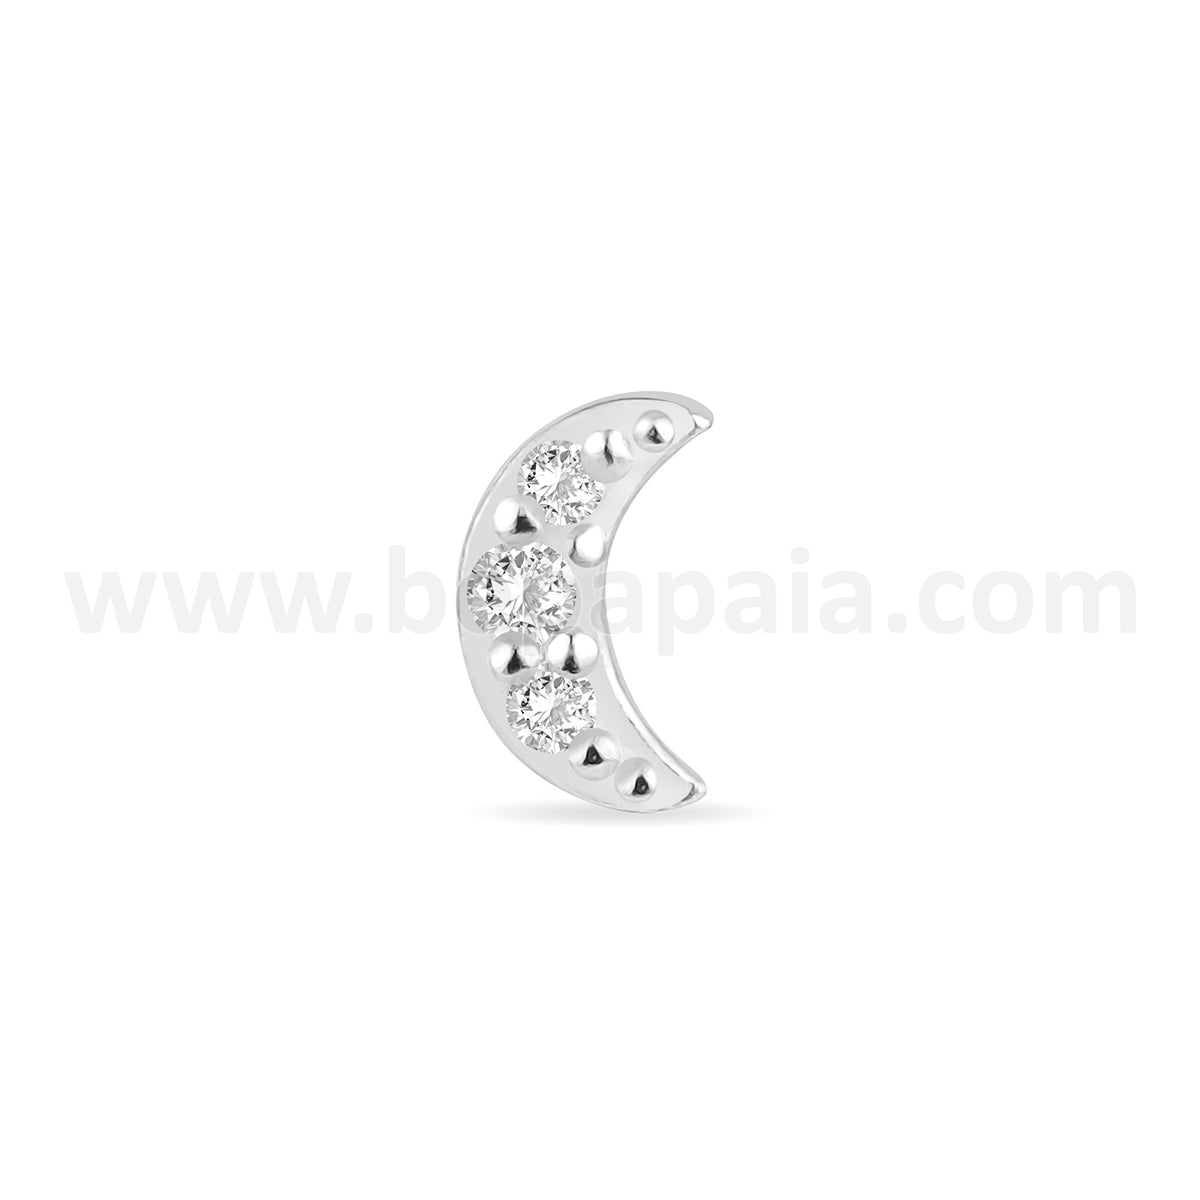 Silver ear stud with moon and gems